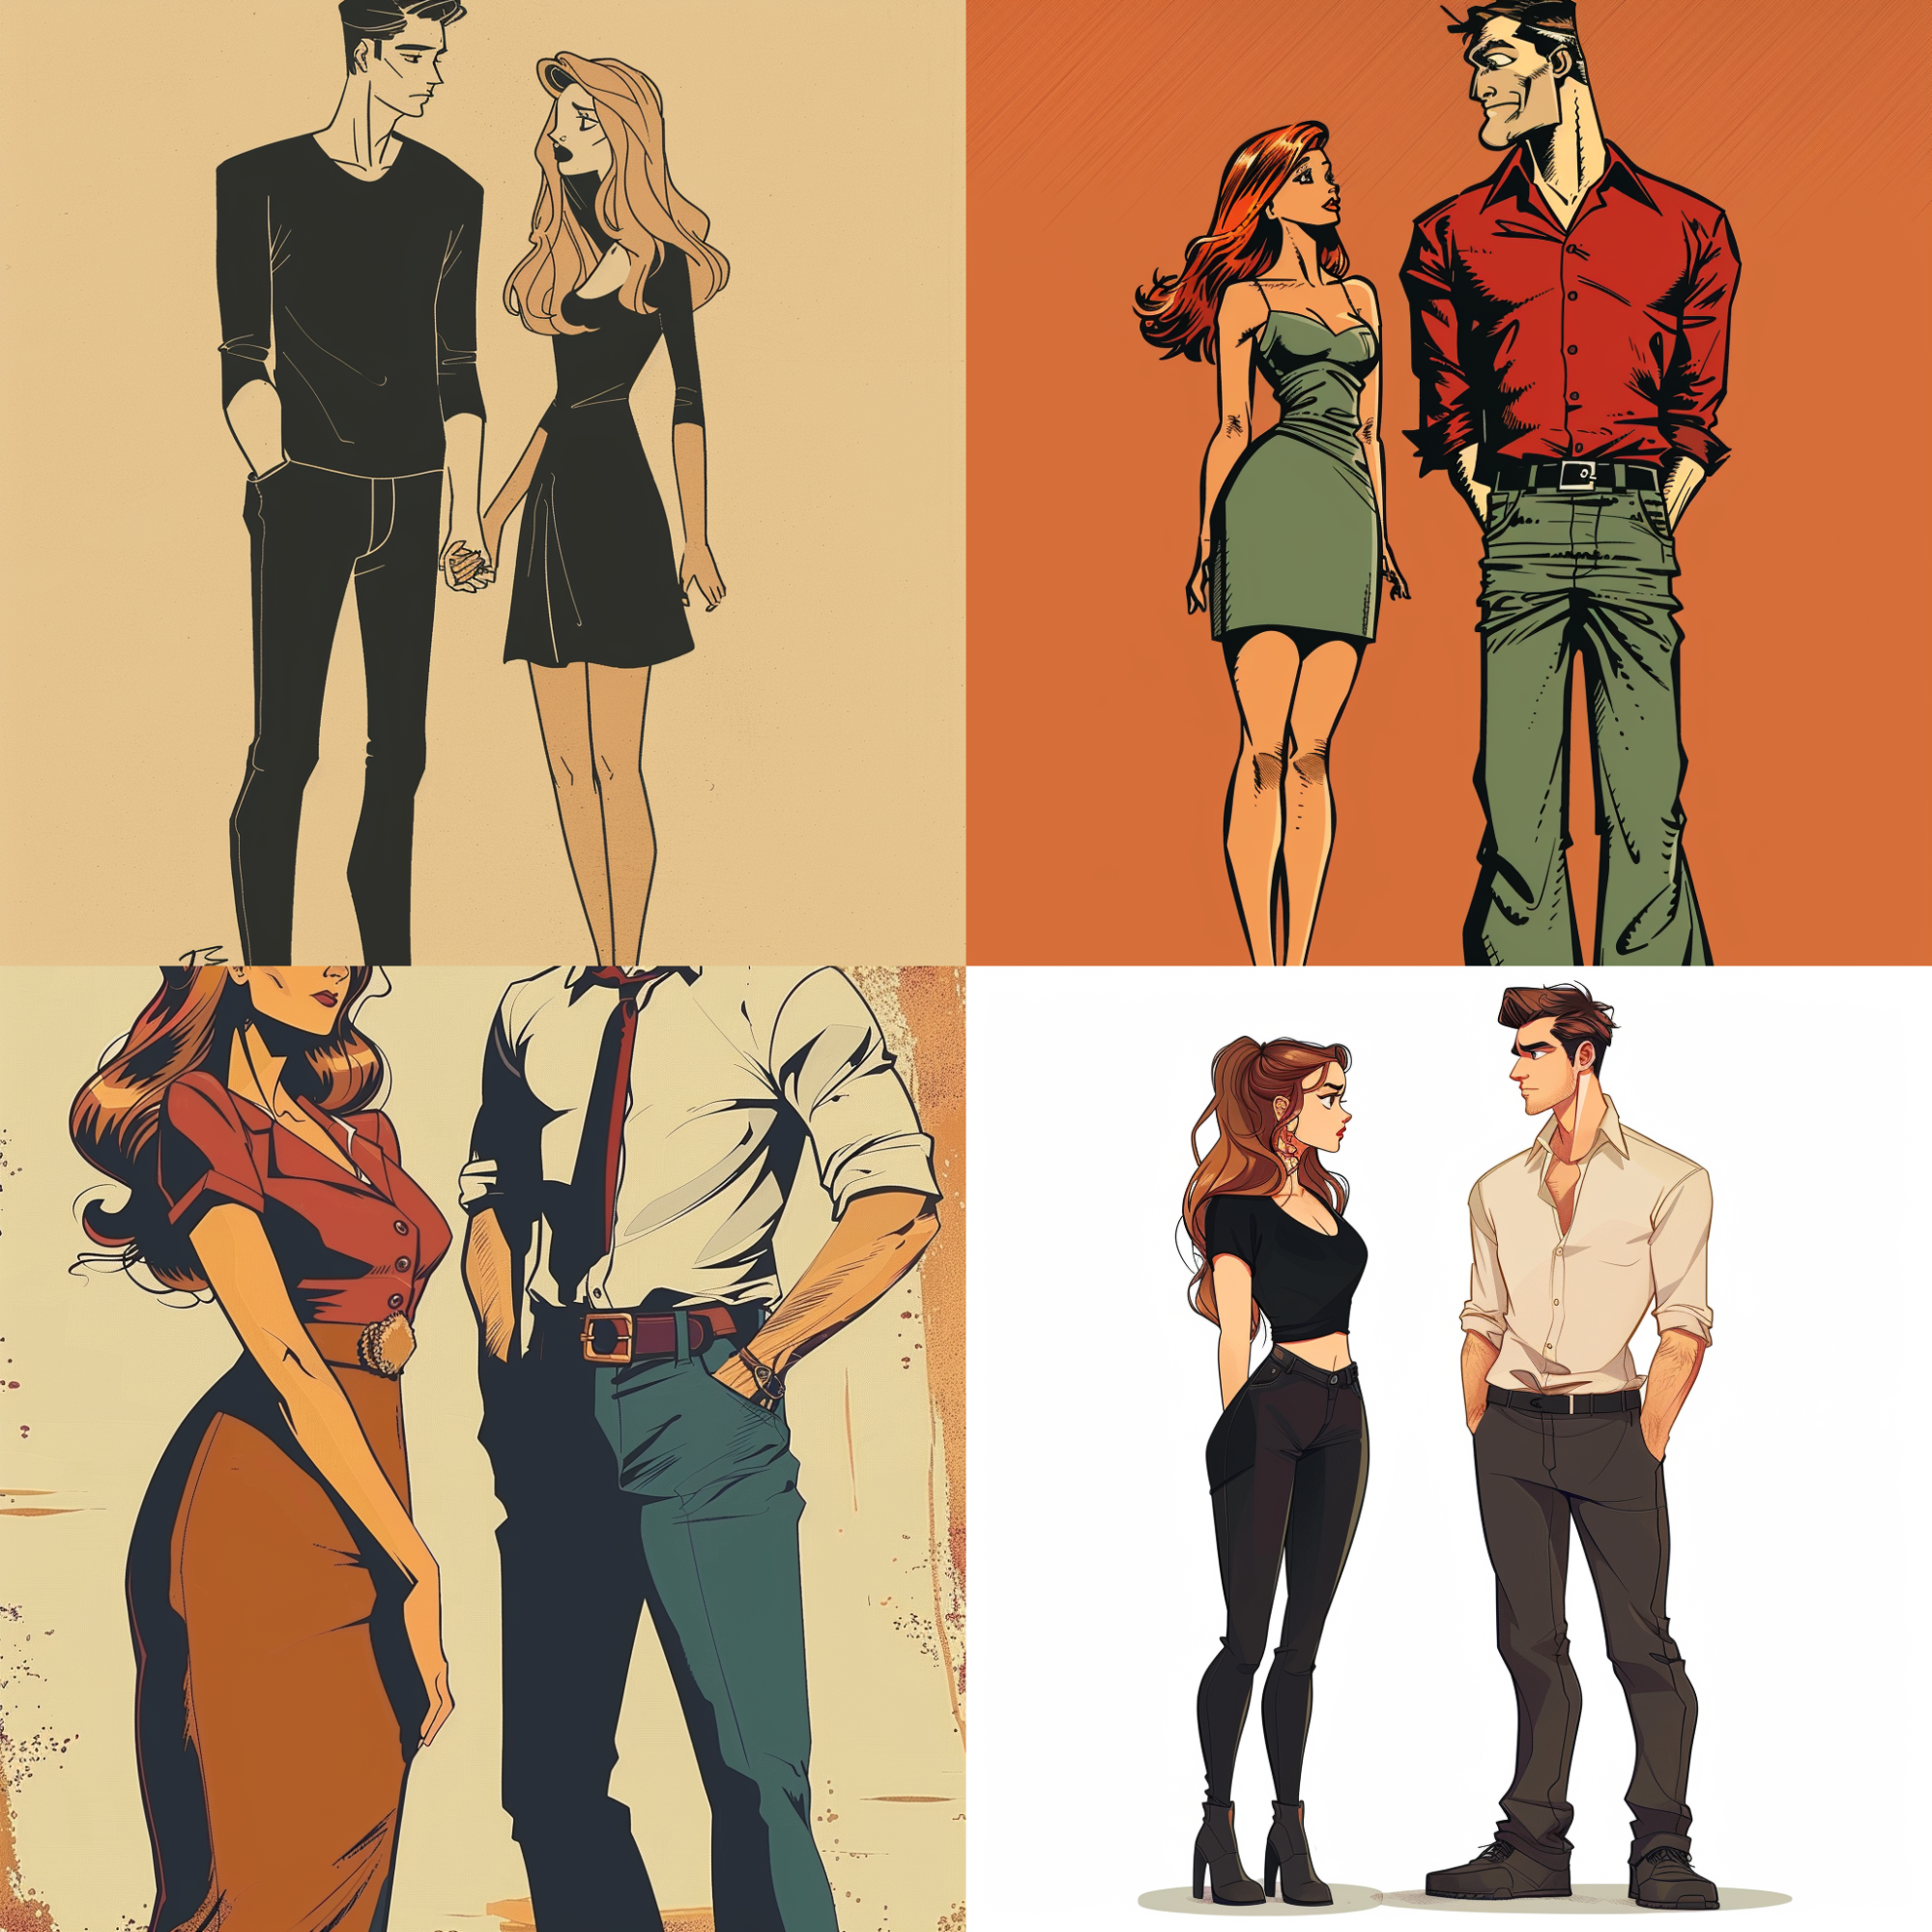 result from midjourney: four images of two white comic style people with a taller man and shorter woman.